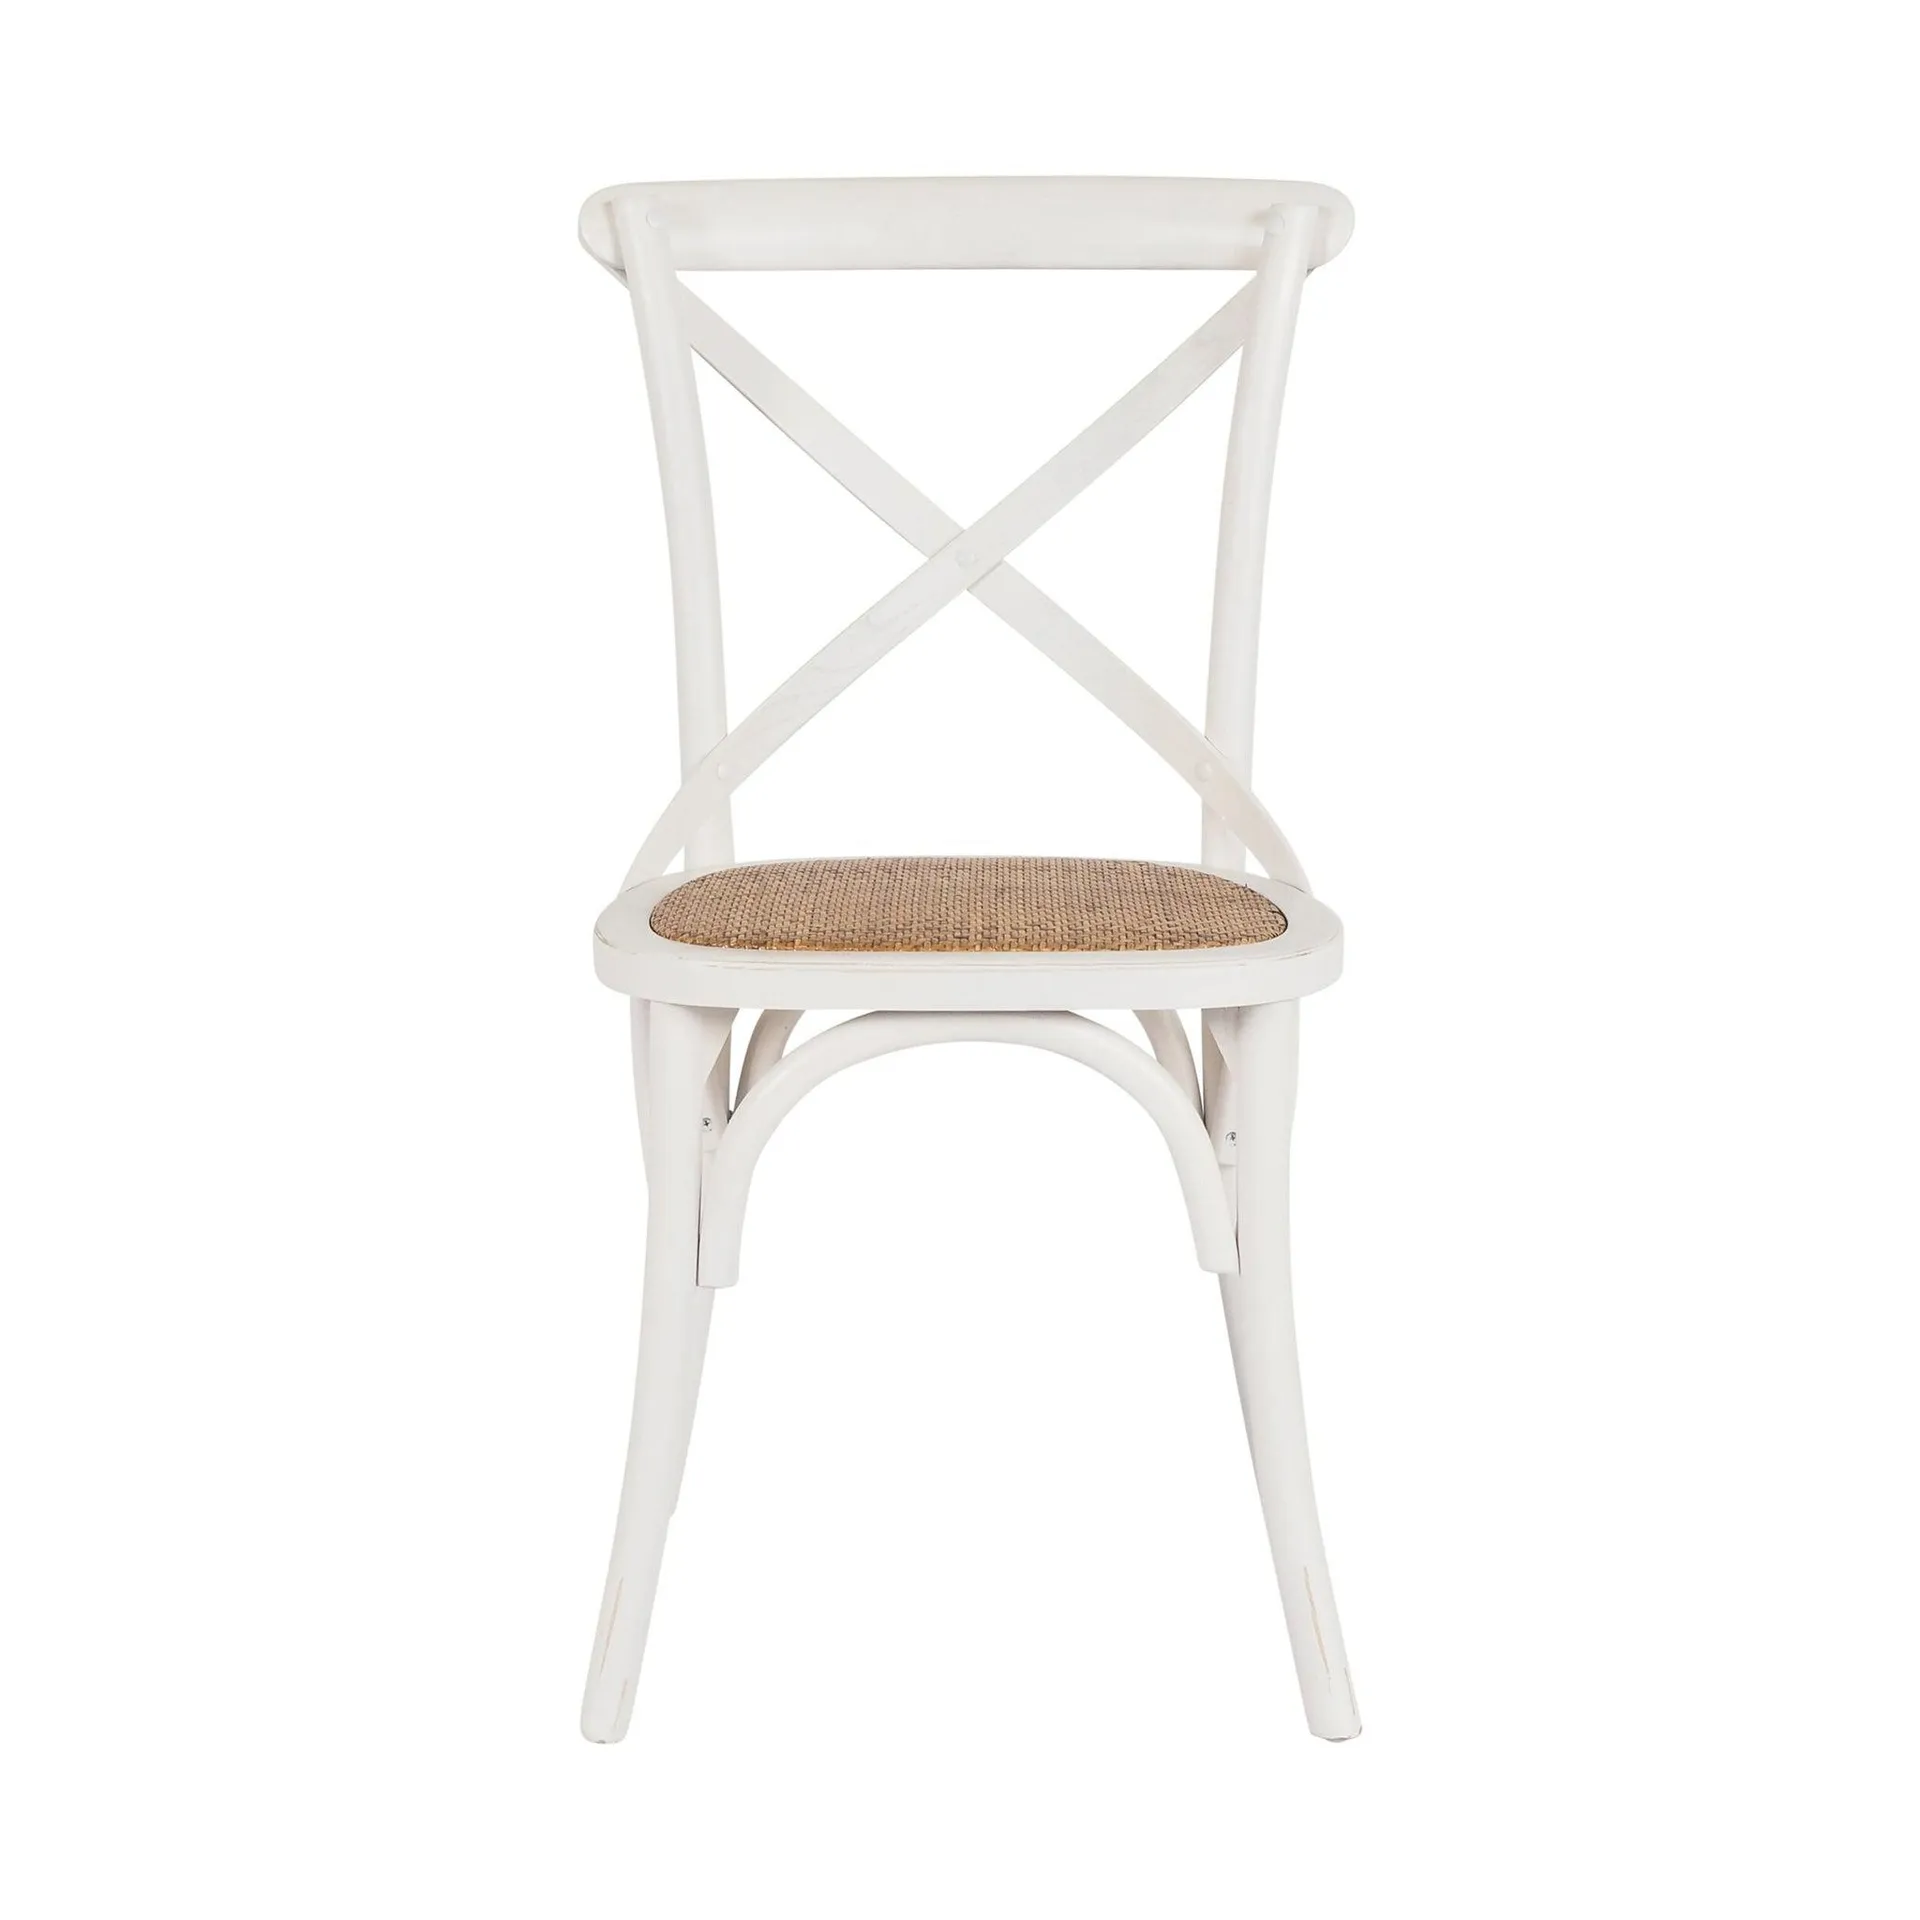 Provincial Cross Back Dining Chair Vintage White